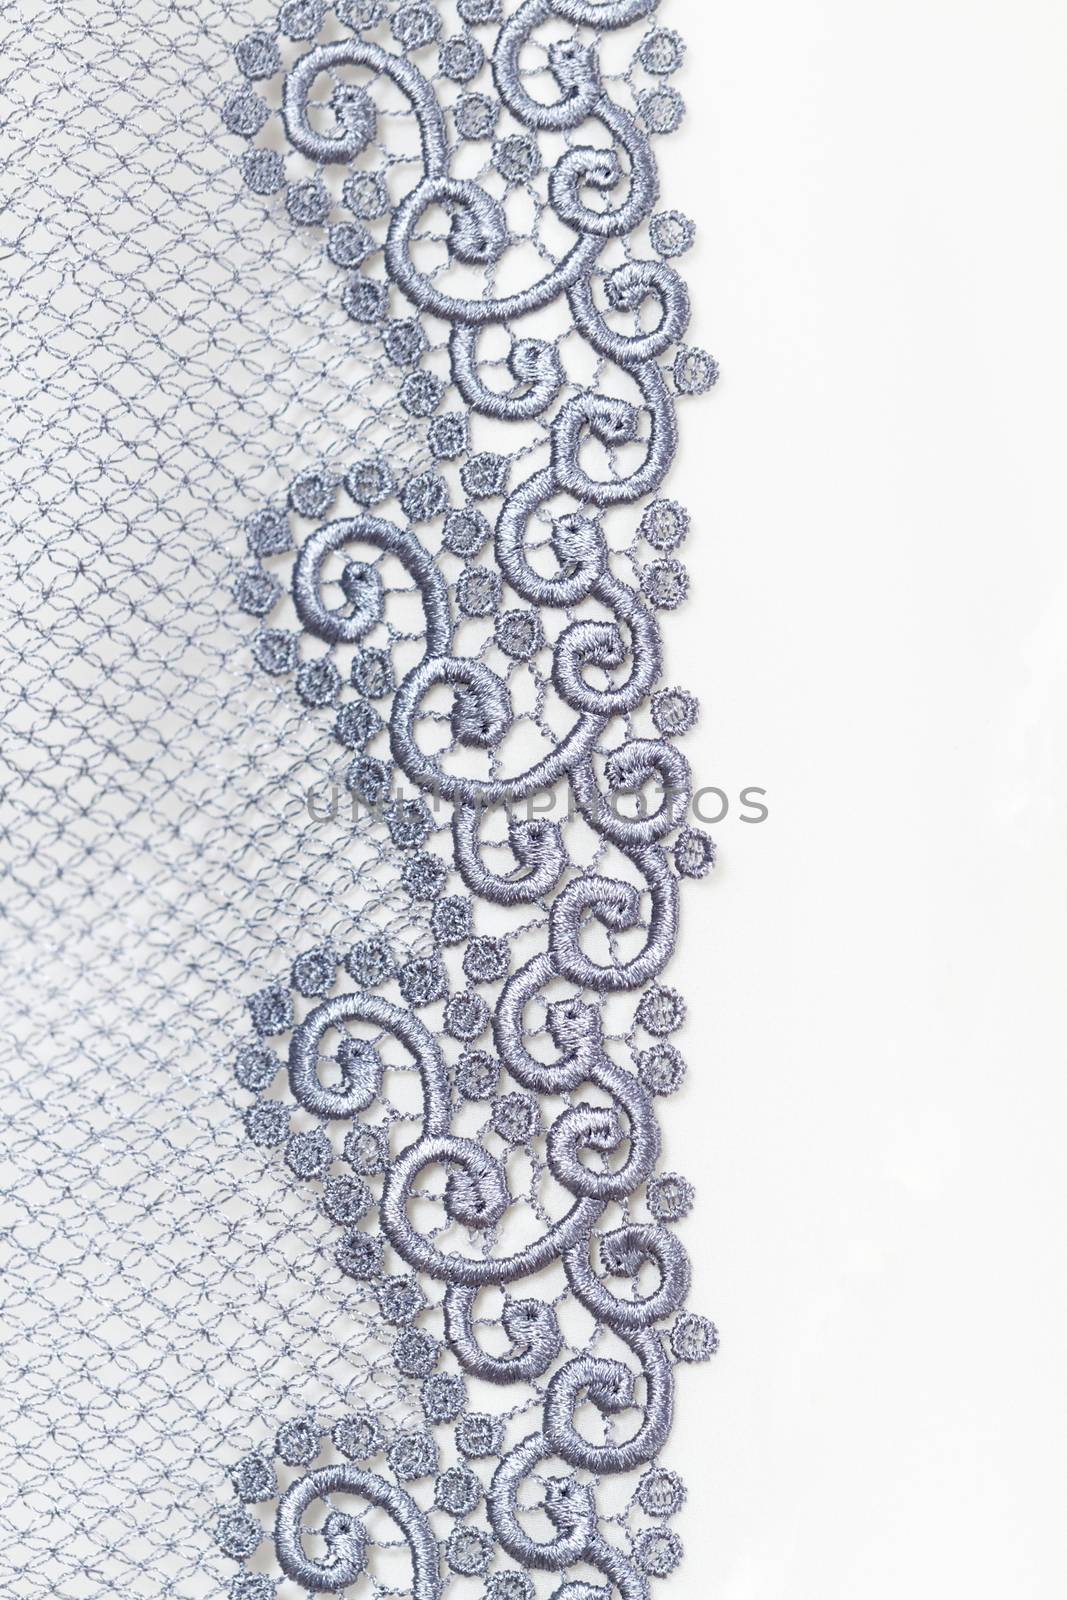 Decorative silver lace on insolated white background